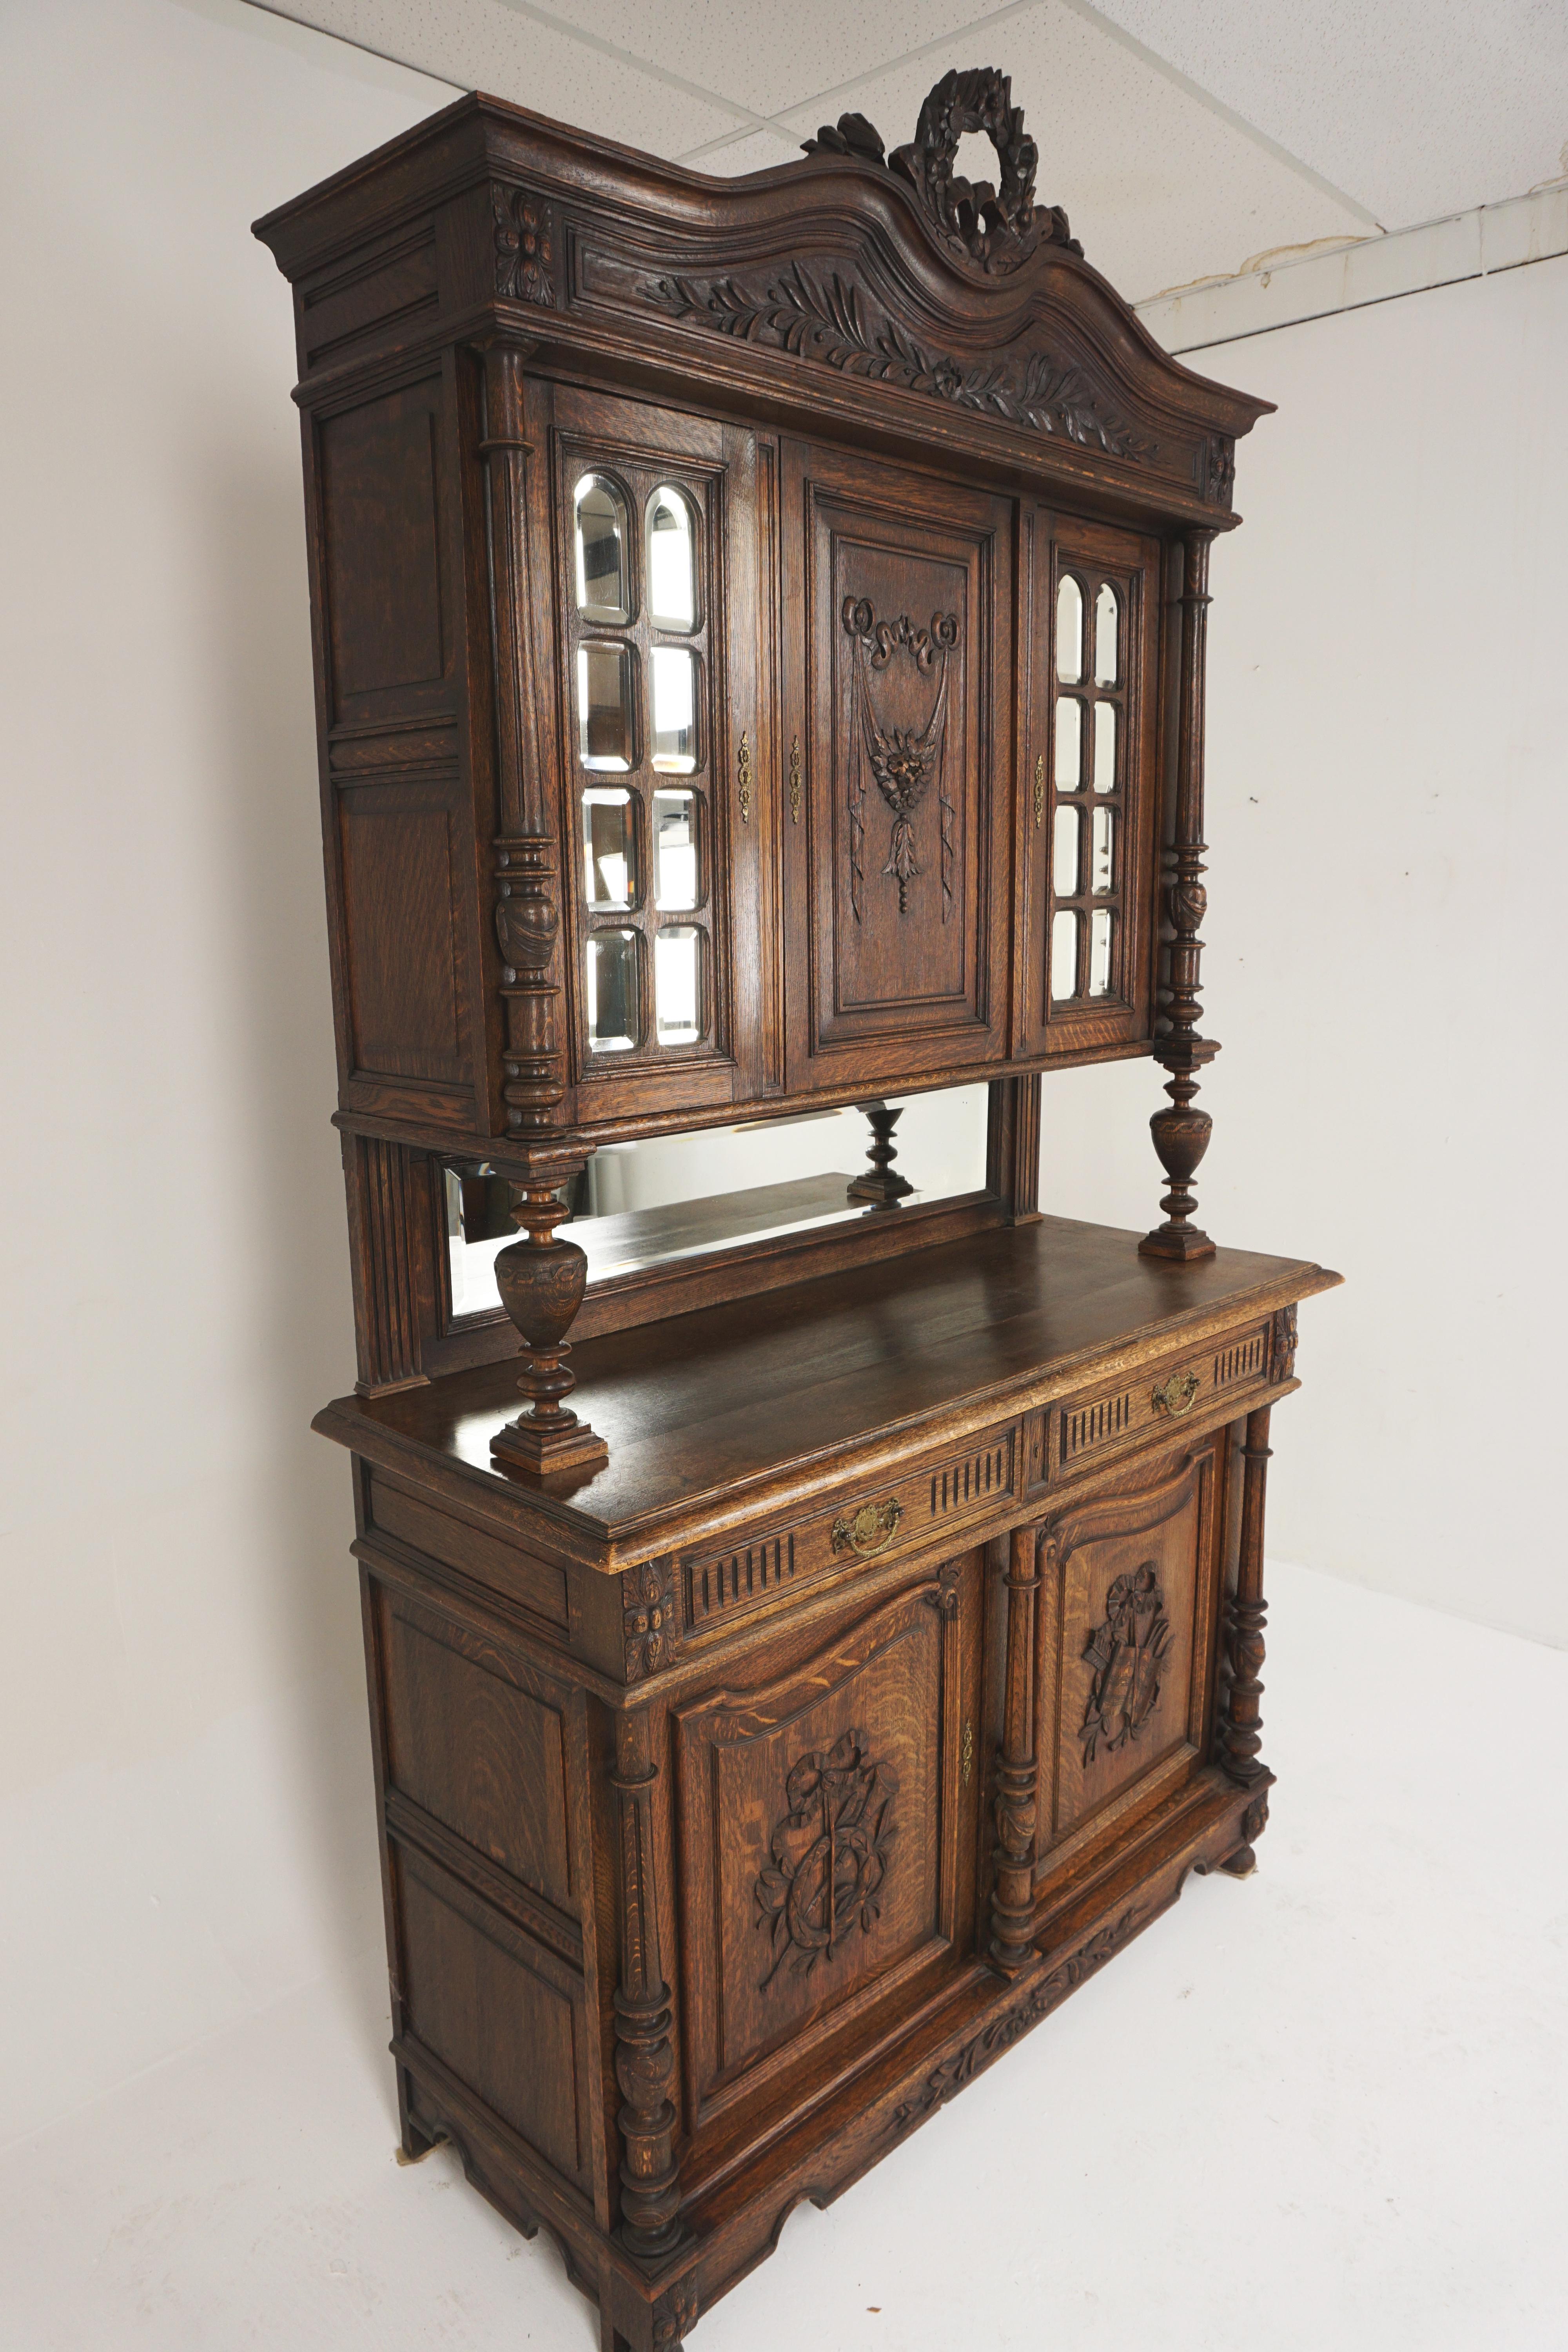 Antique buffet hutch, carved oak, France 1890, H044

France 1890
Solid oak
Original finish
Carved cornice on the top with carved flower design to the center
Single carved door flanked by a pair of beveled mirrored doors
Rectangular mirror